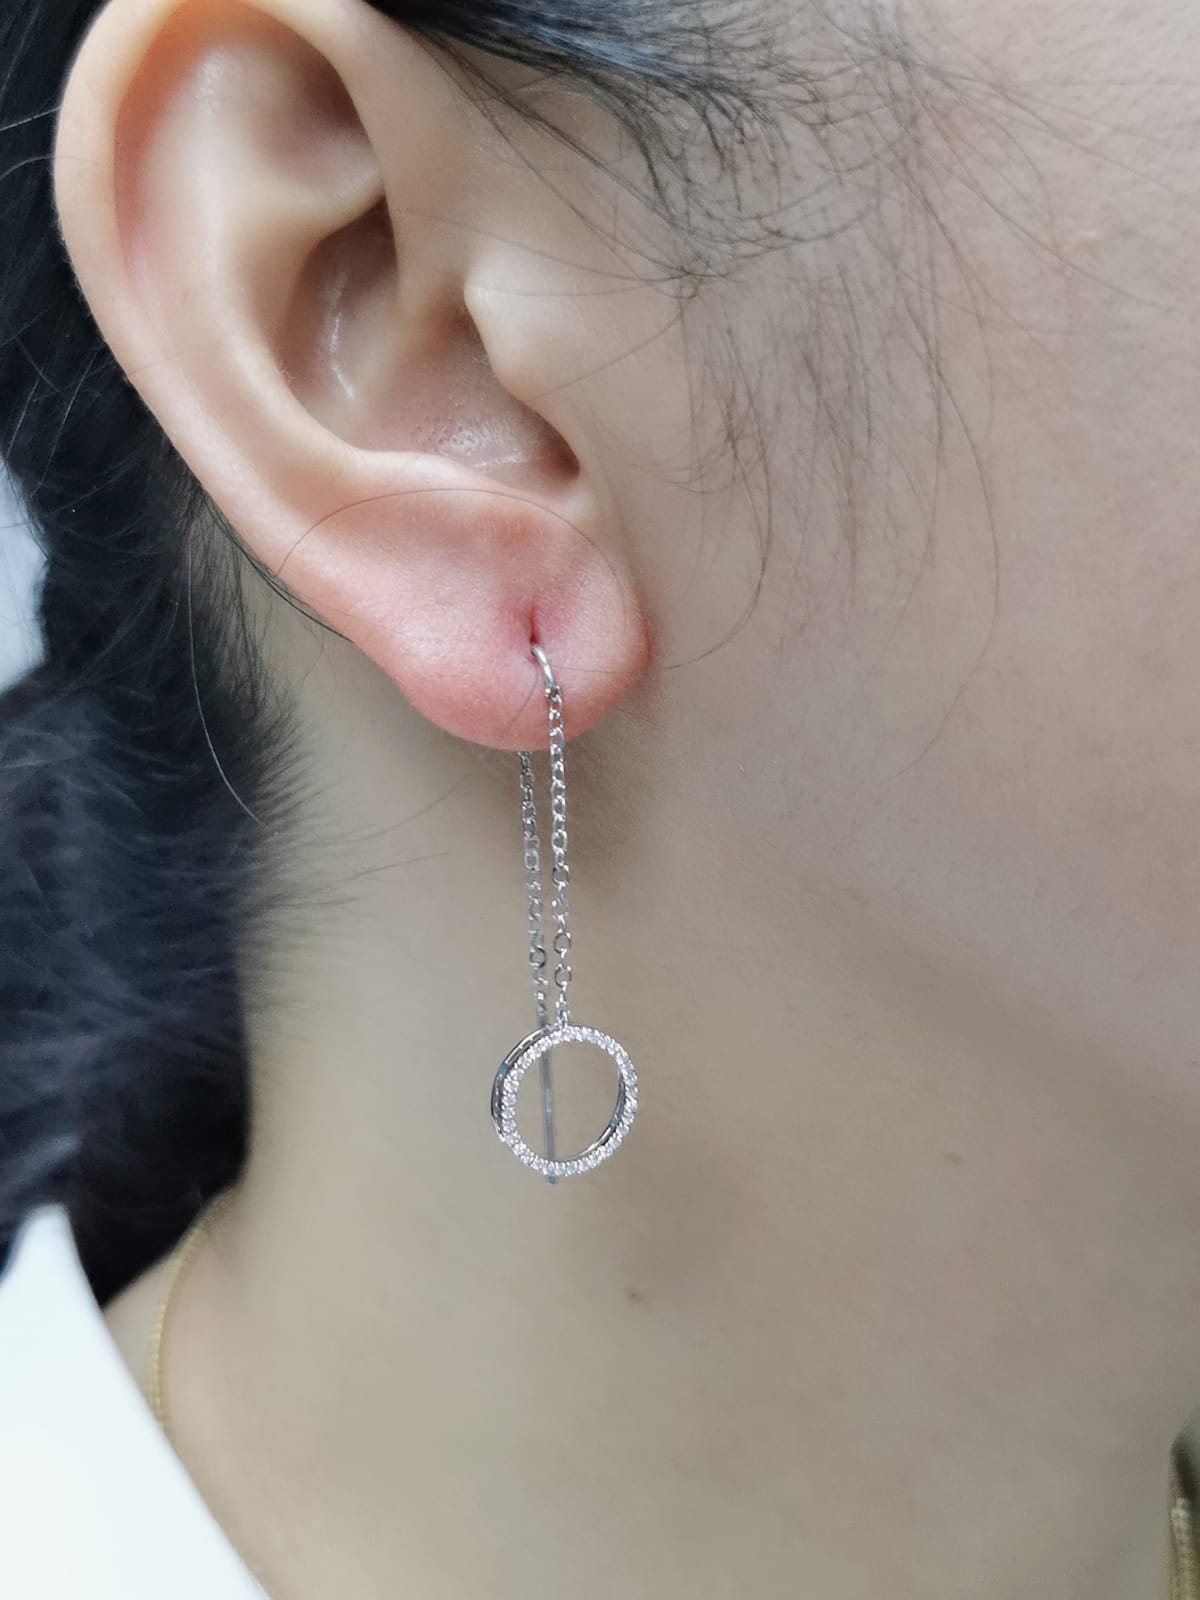 Needle And Thread Earrings With Diamond Open Circle Charms In 18k White Gold.